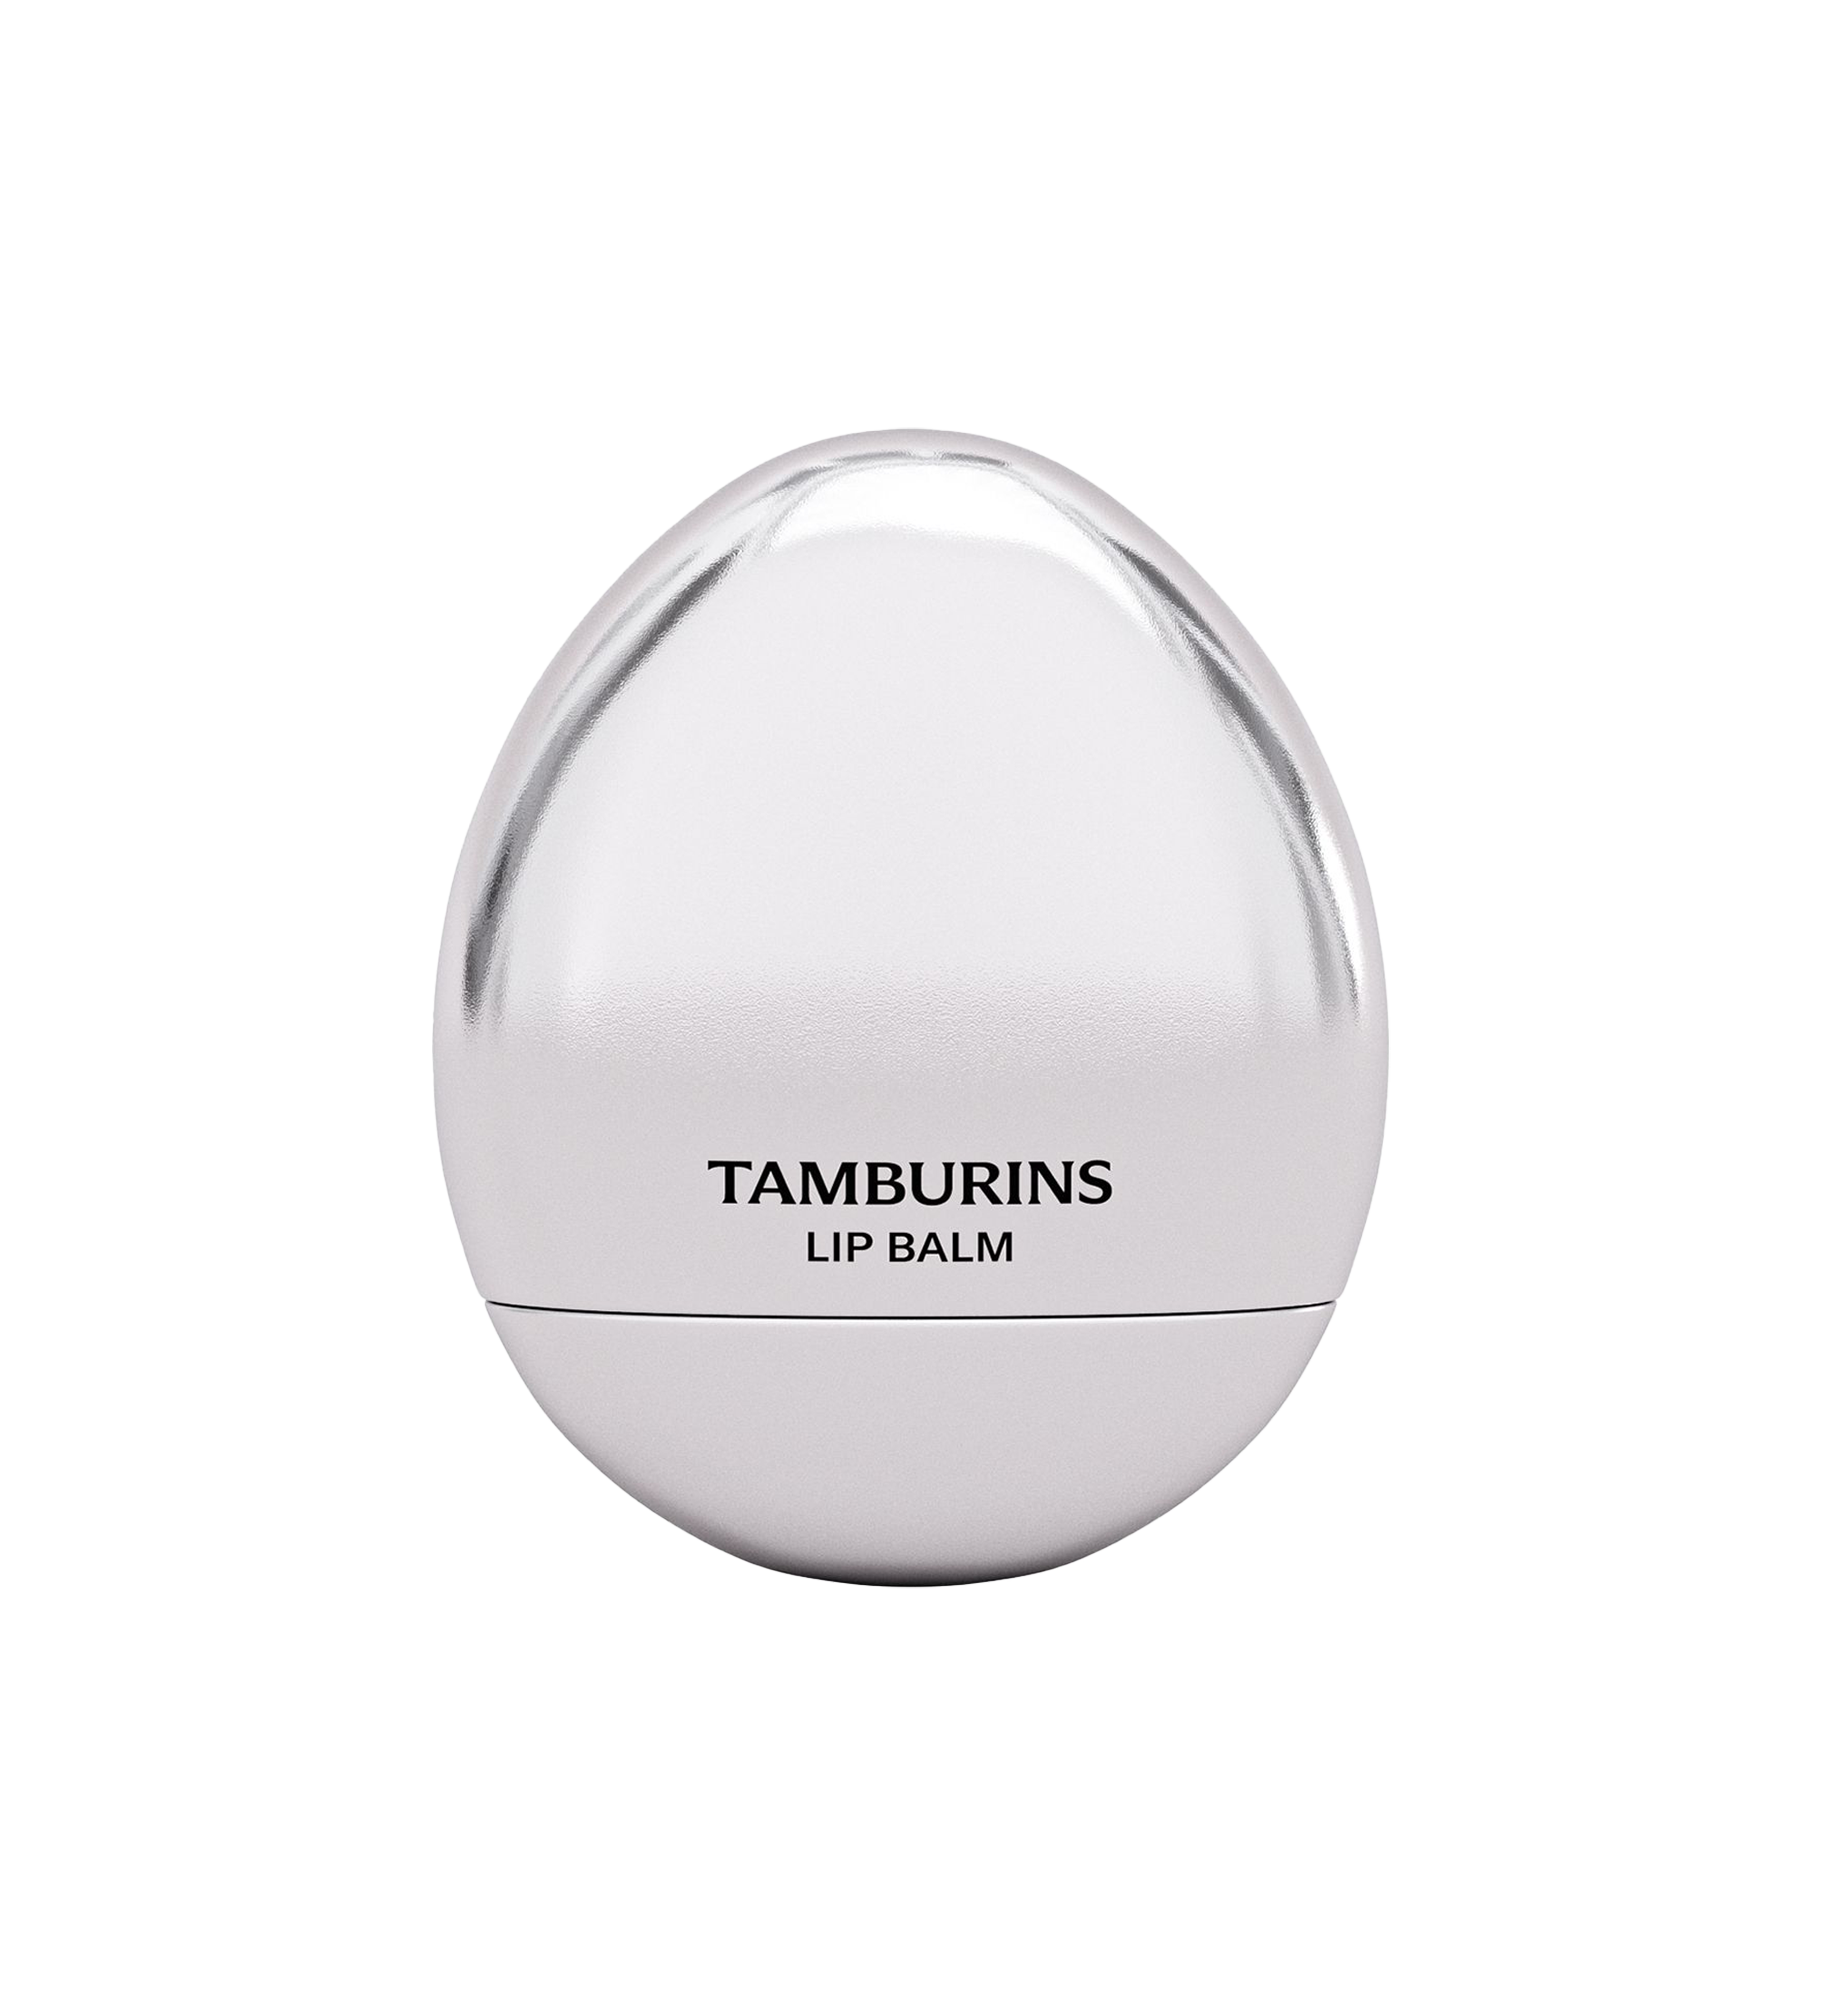 TAMBURINS Egg Lip Balm in a white container, providing nourishment and hydration for your lips.